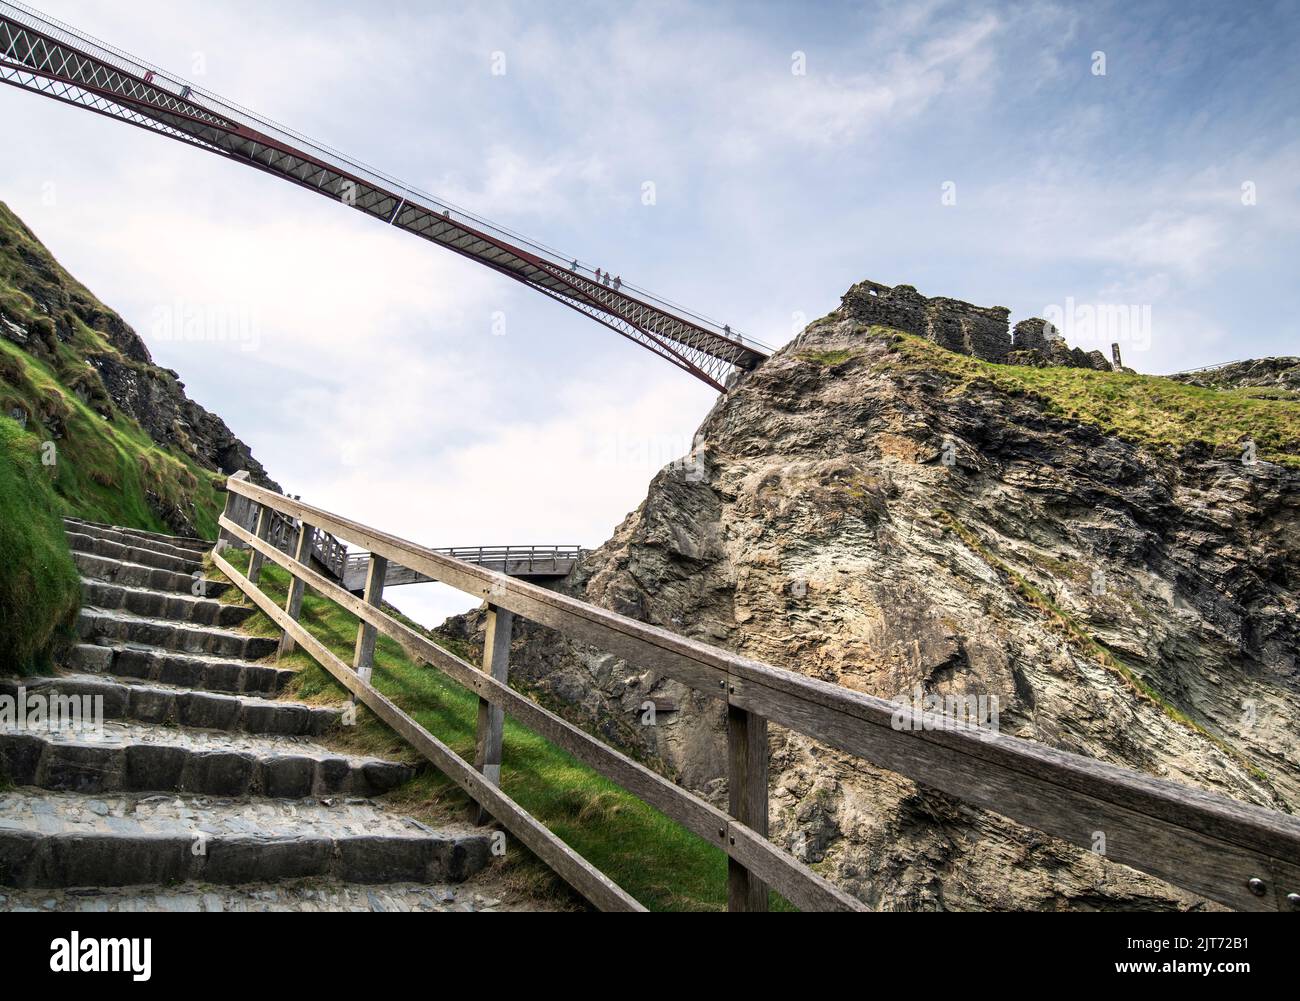 Suspension bridge giving access to Tintagel Castle in Cornwall, England, UK Stock Photo